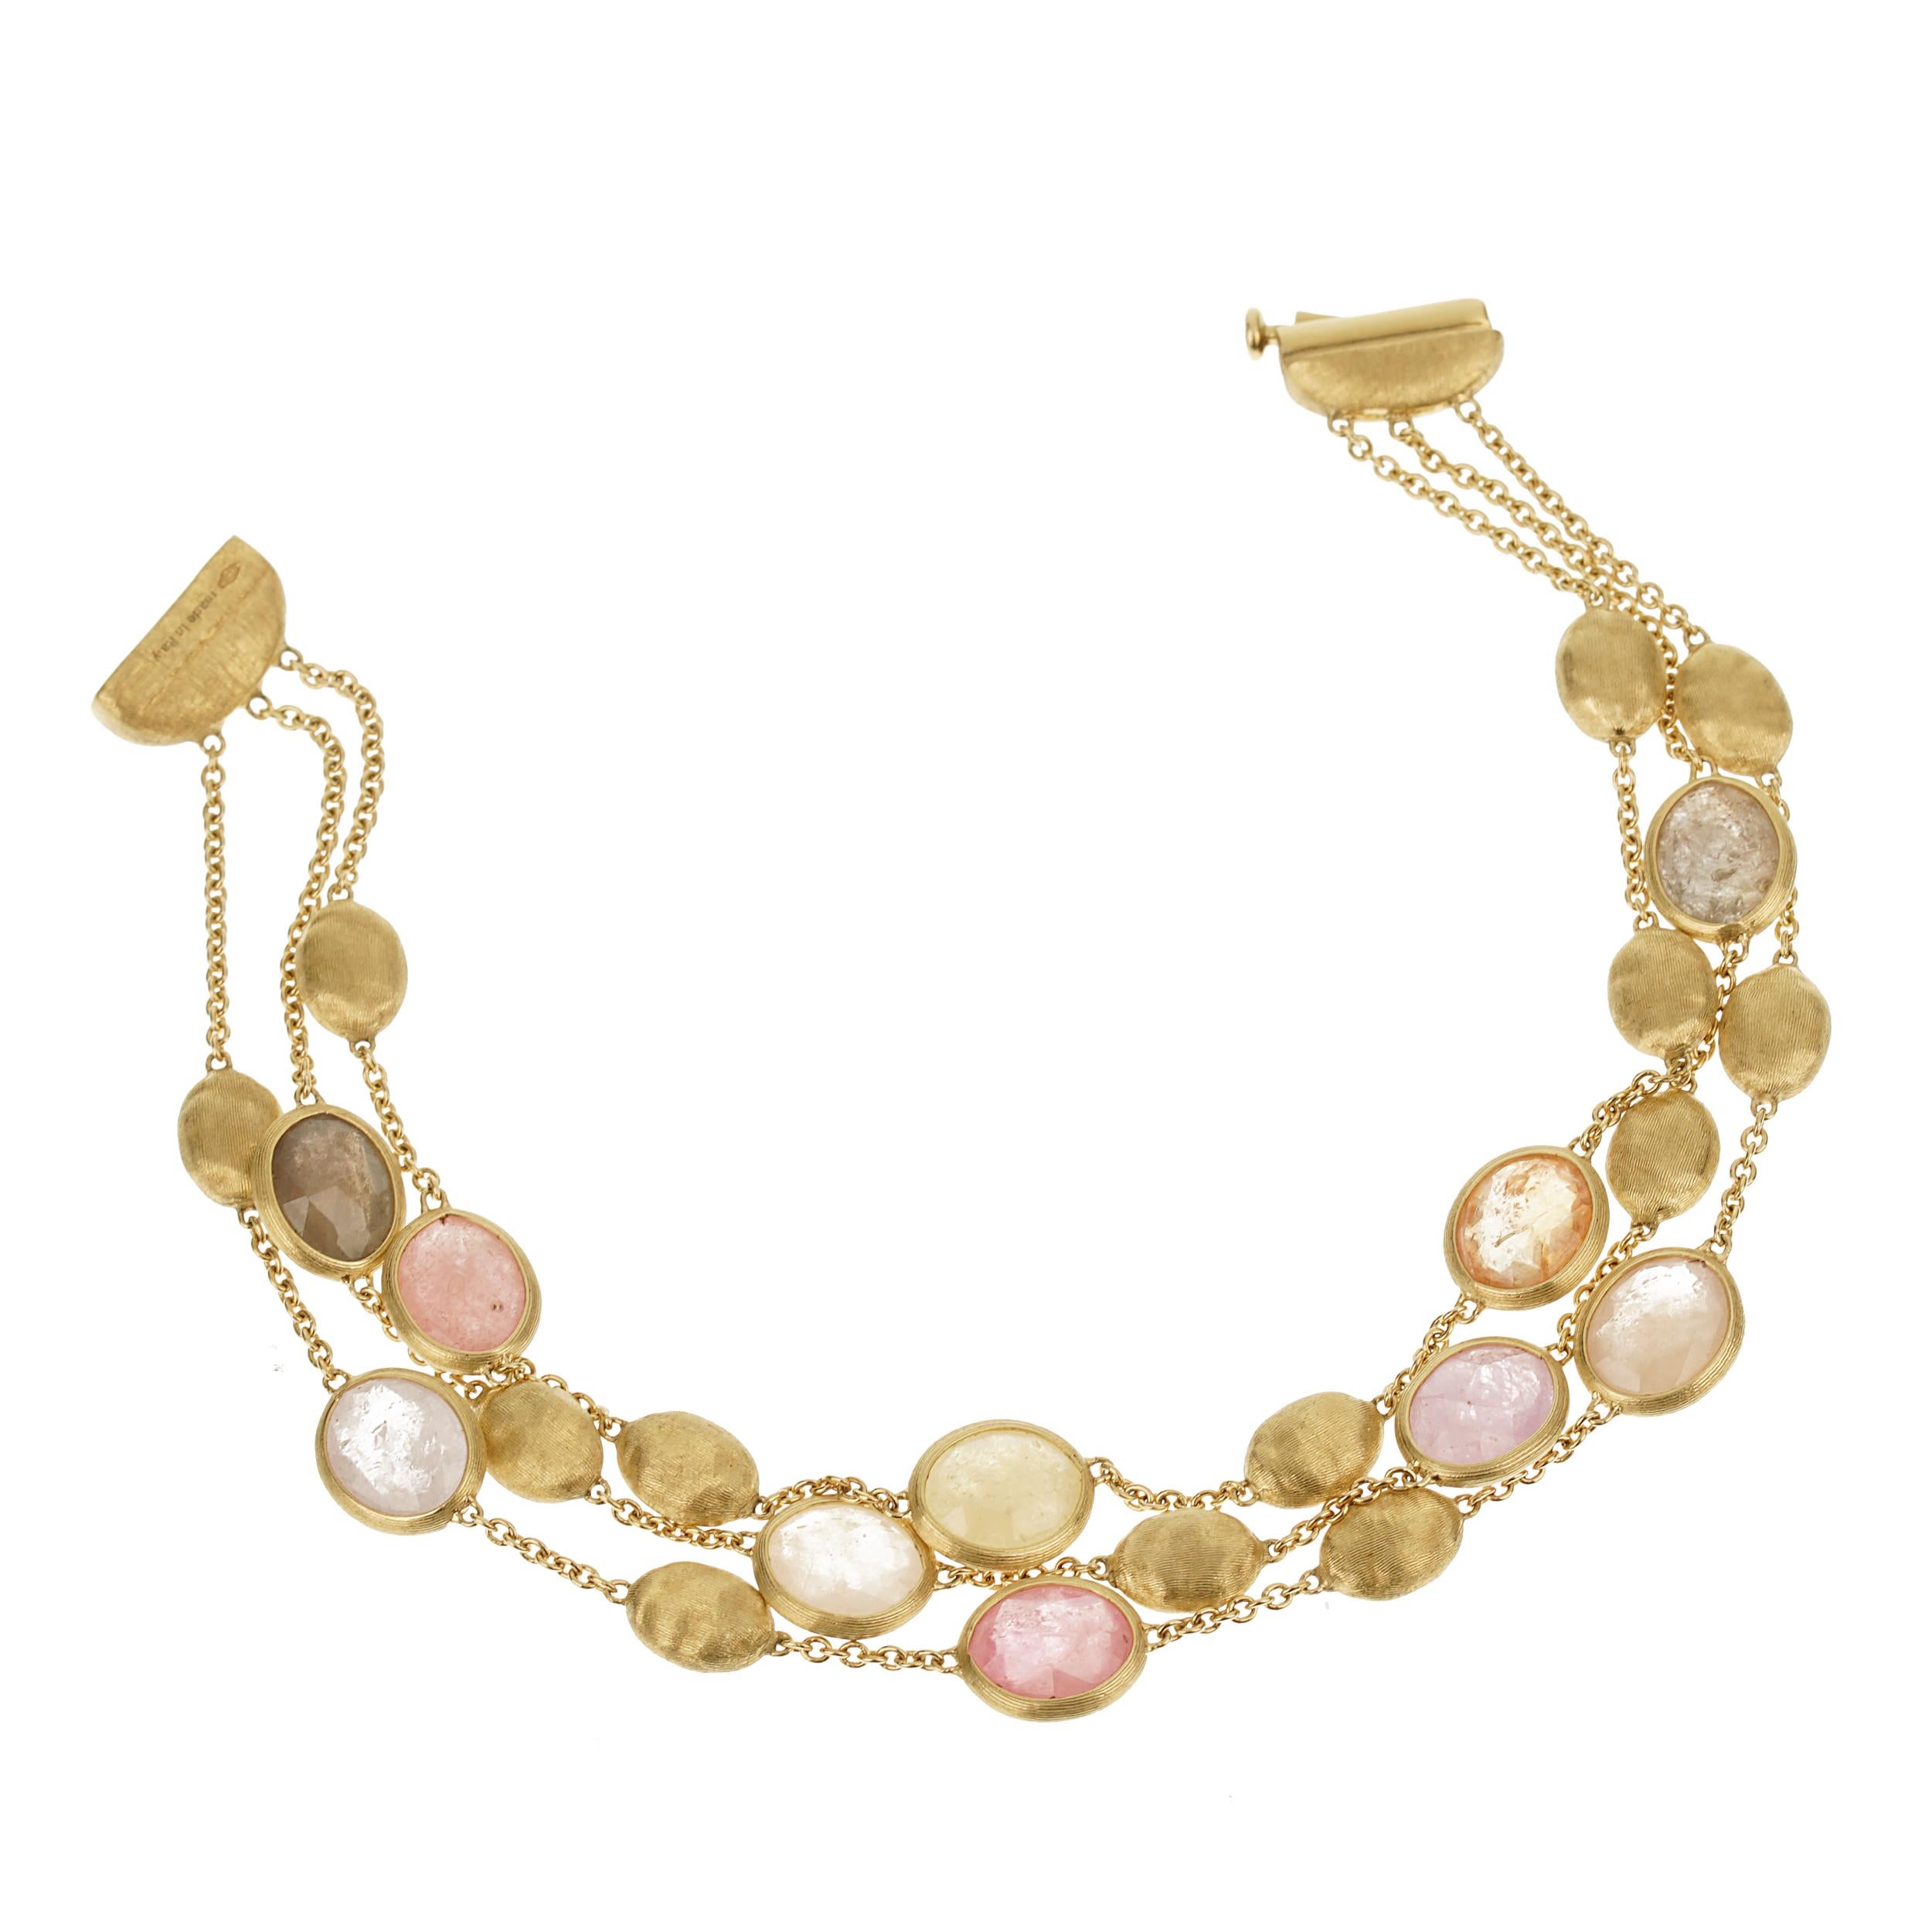 The Marco Bicego Siviglia Gemstone Yellow Gold Bracelet is an embodiment of luxurious elegance and artisanal craftsmanship. This exquisite piece features three rows of alternating vibrant gemstones and hand-engraved pebbles, meticulously crafted in